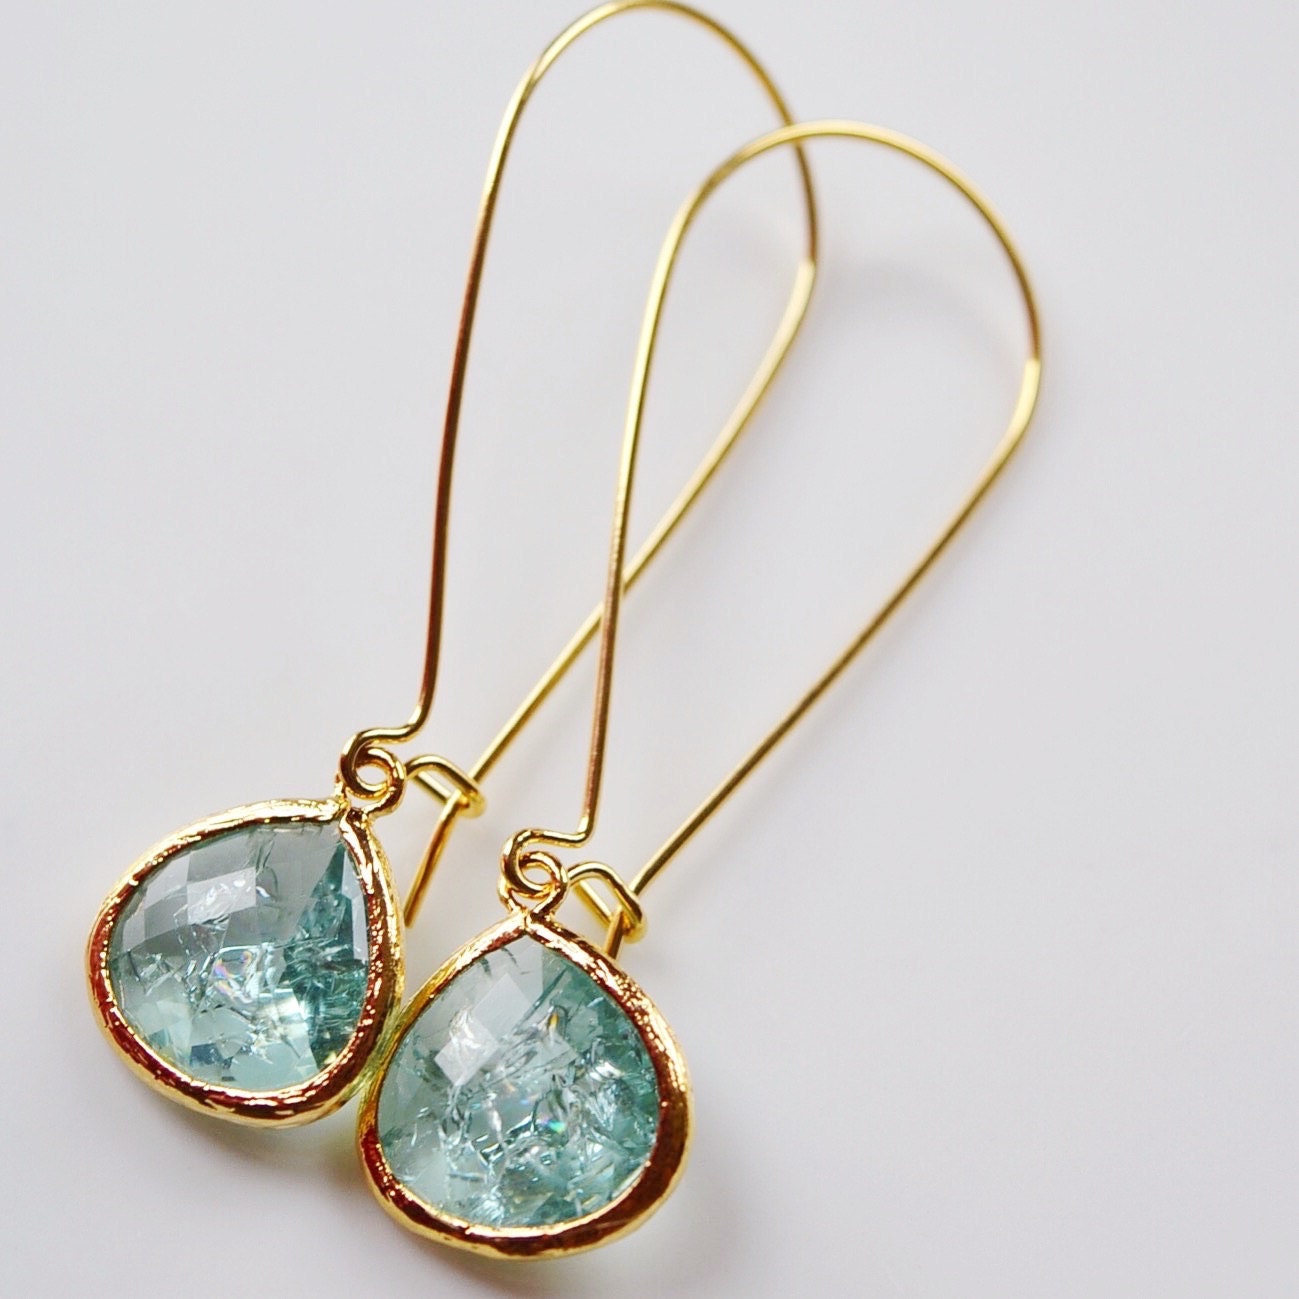 Aqua Earrings-Cracked Glass Gold Plated Long by GlamNecessities